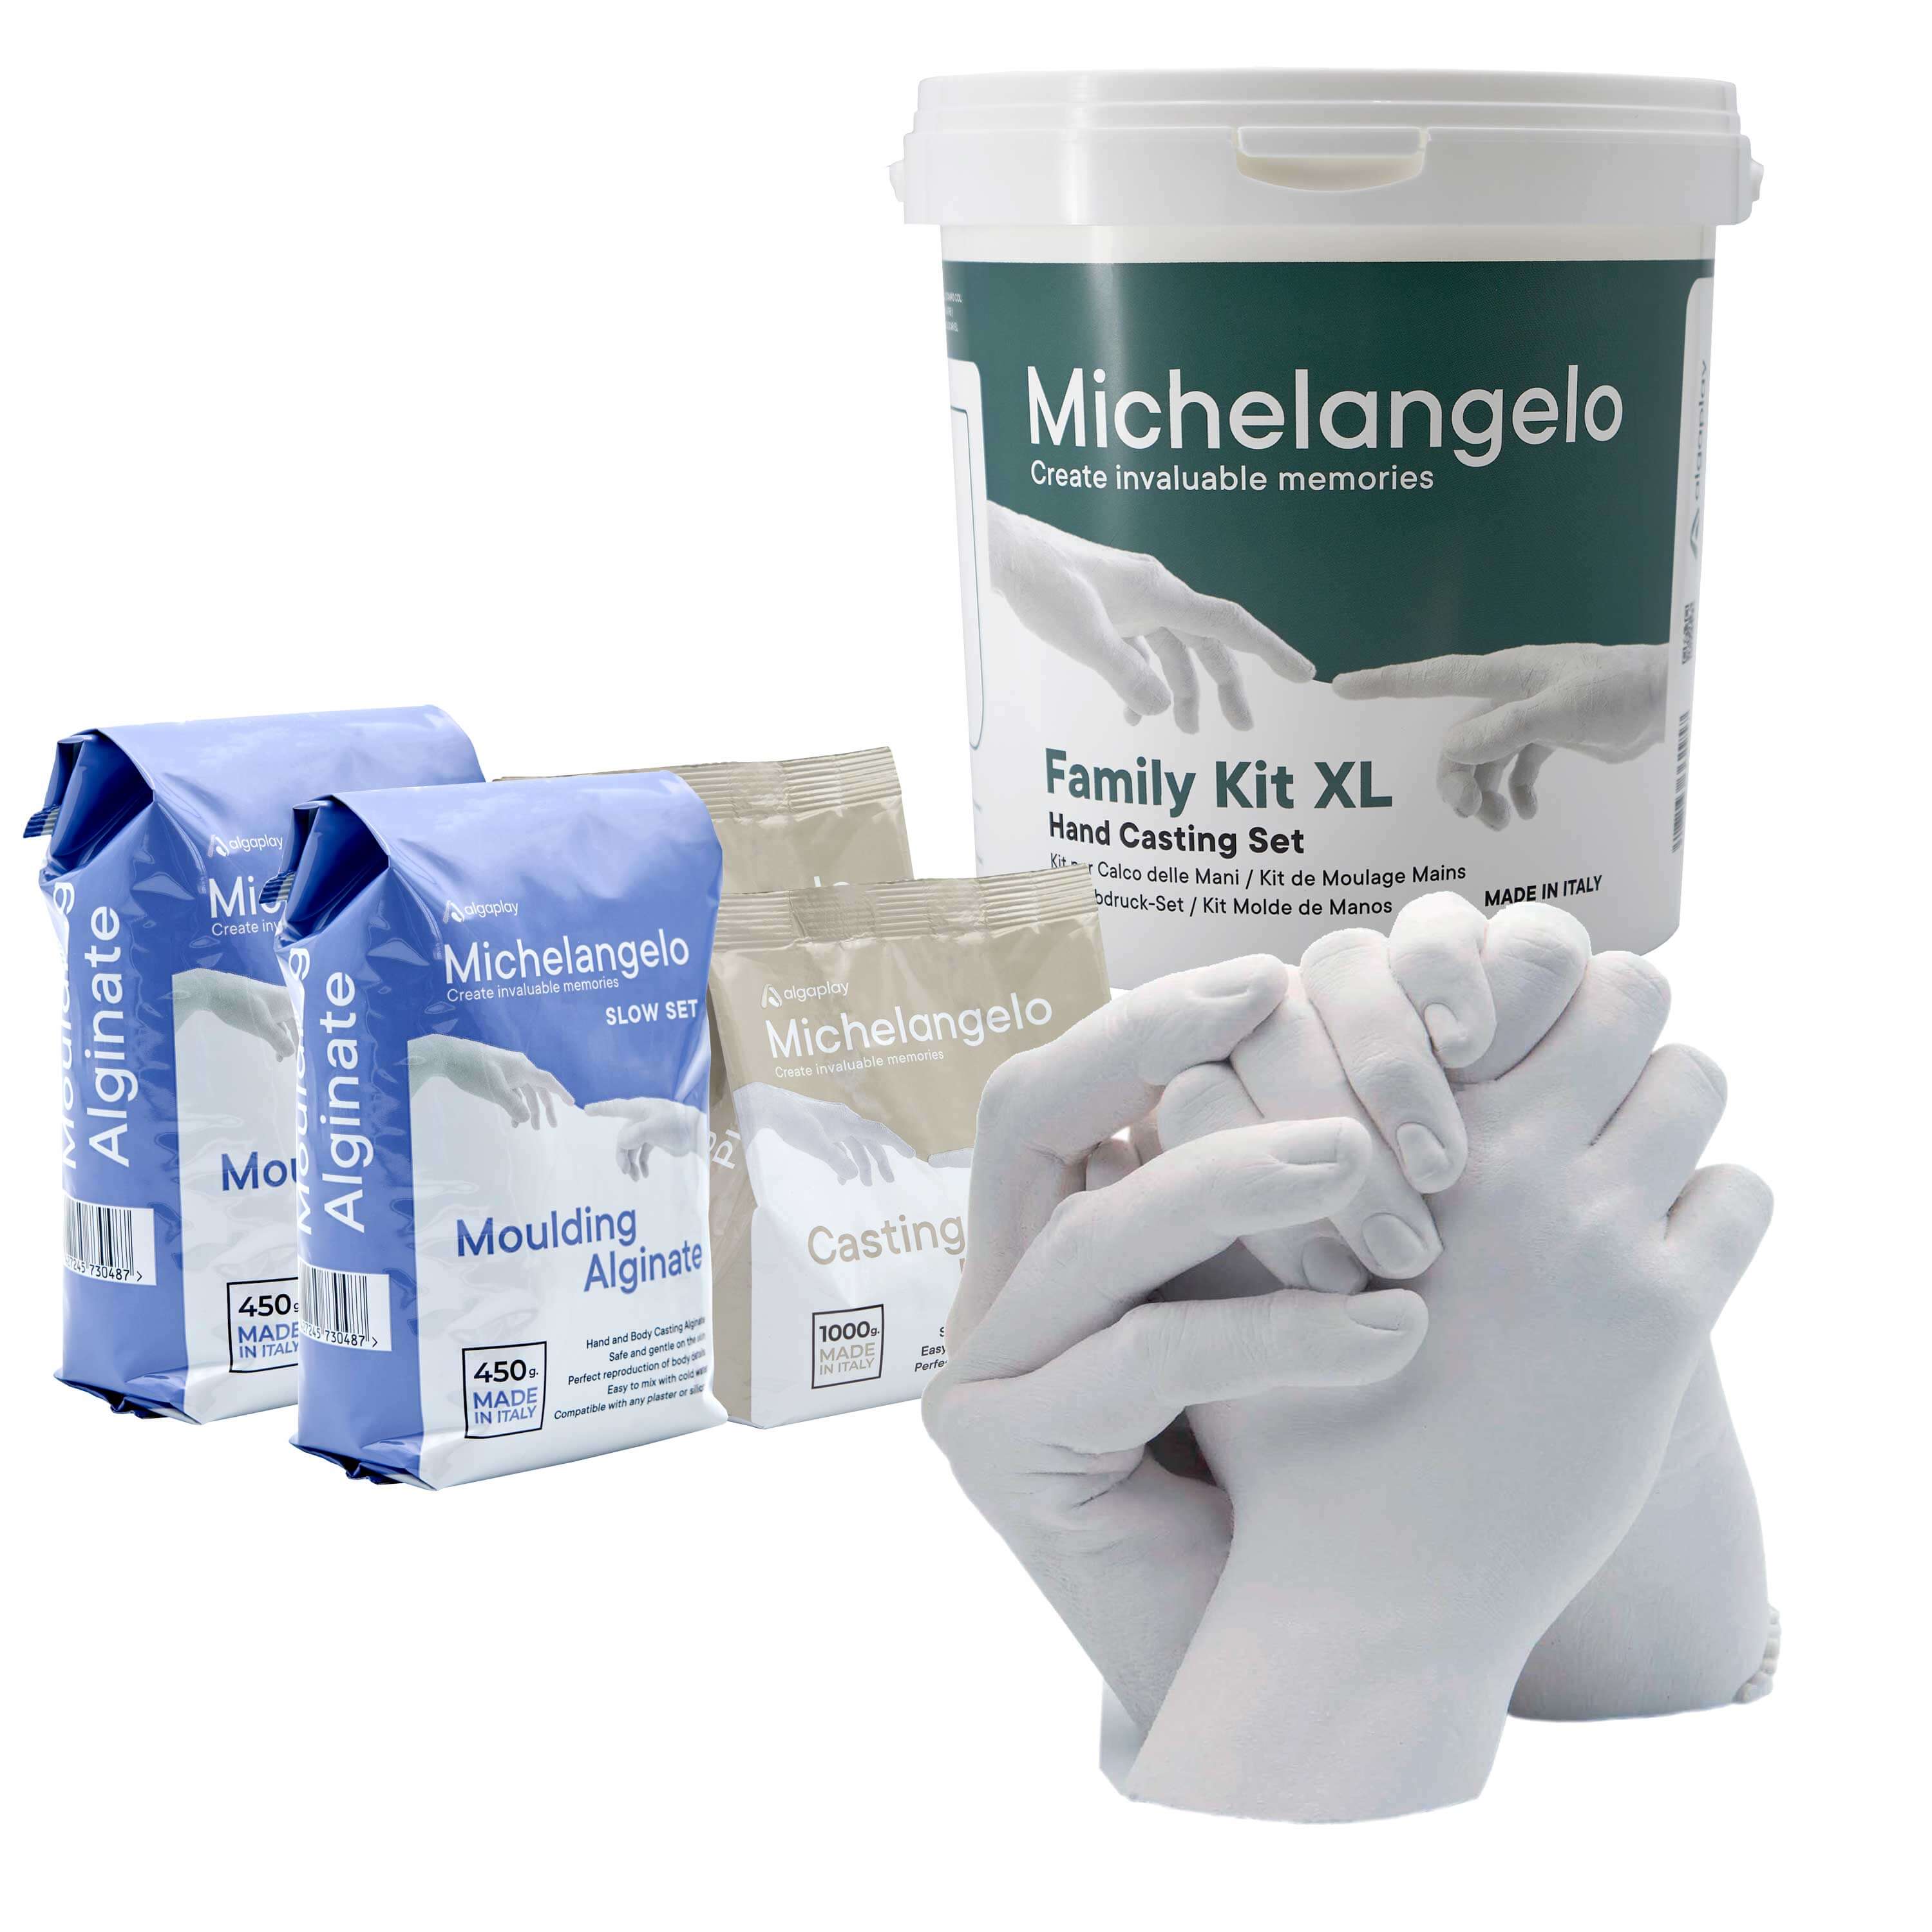 Adult Hand Casting Kit Alginate - The Compleat Sculptor